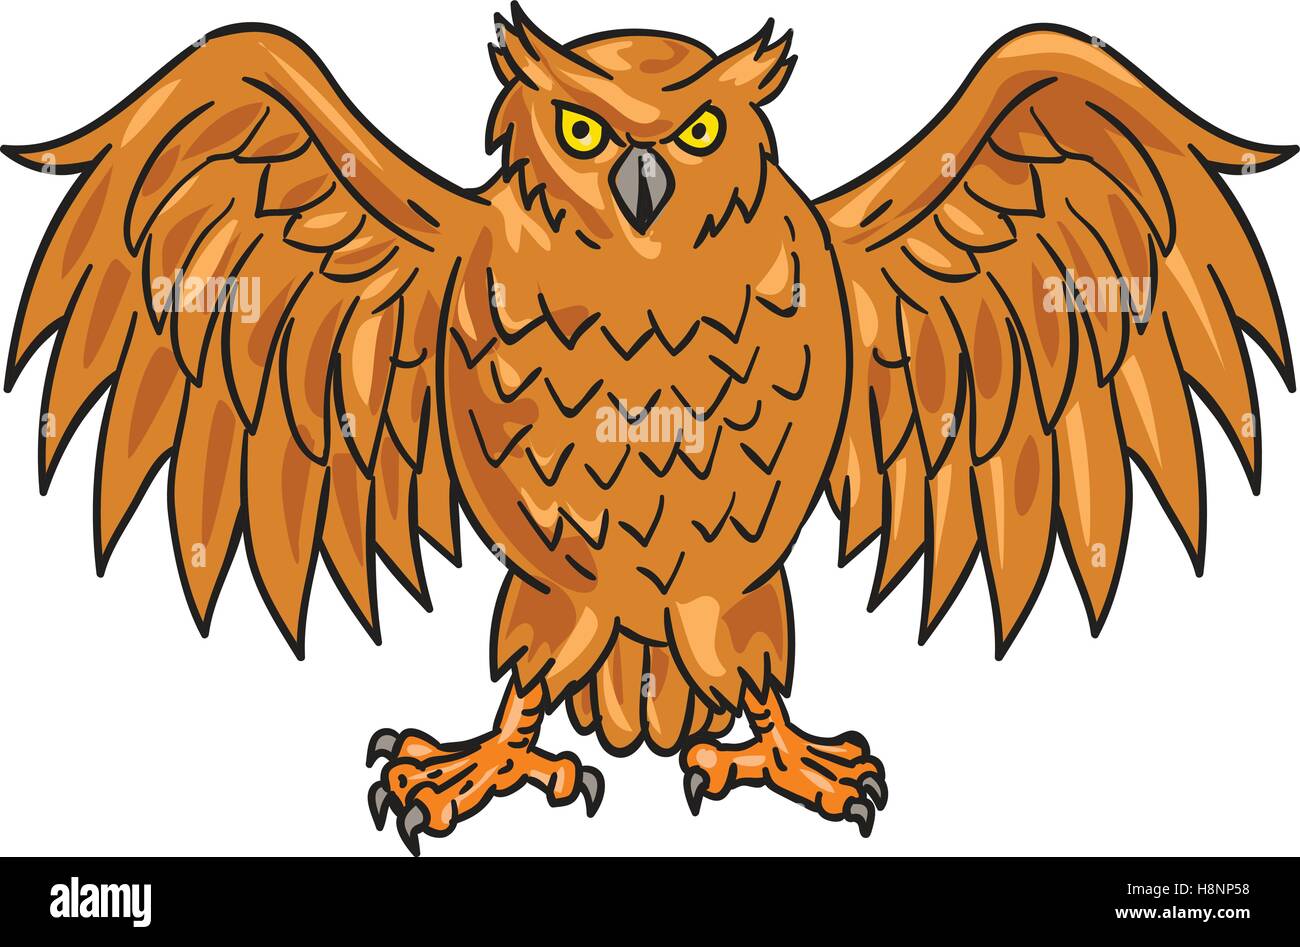 Drawing sketch style illustration of an angry owl facing front with spread wings set on isolated white background. Stock Vector